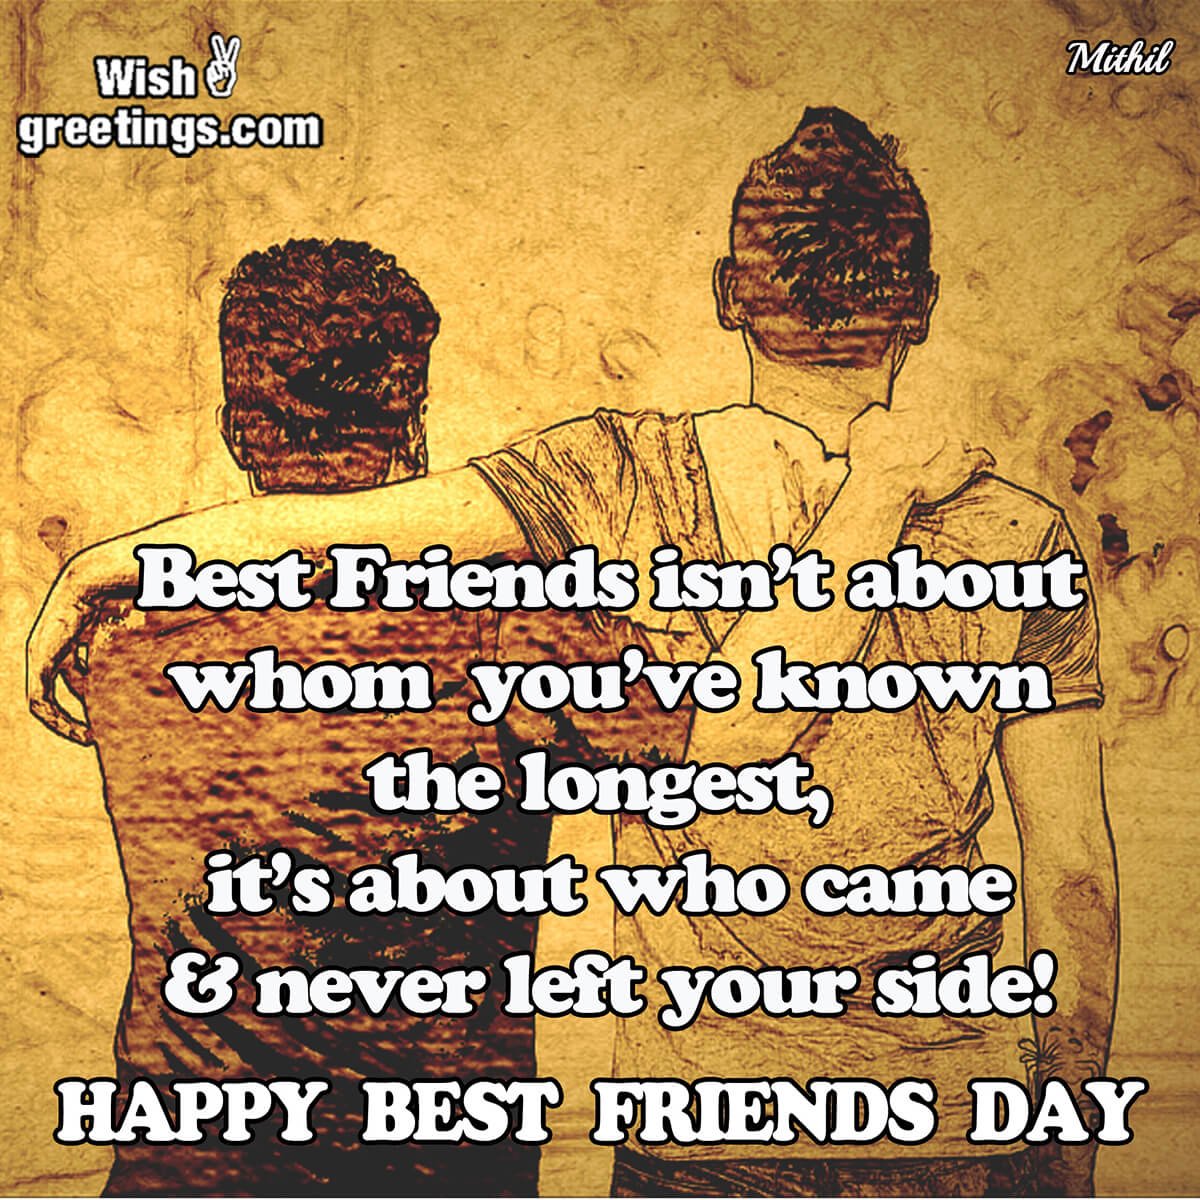 Happy Best Friend’s Day Quote Image